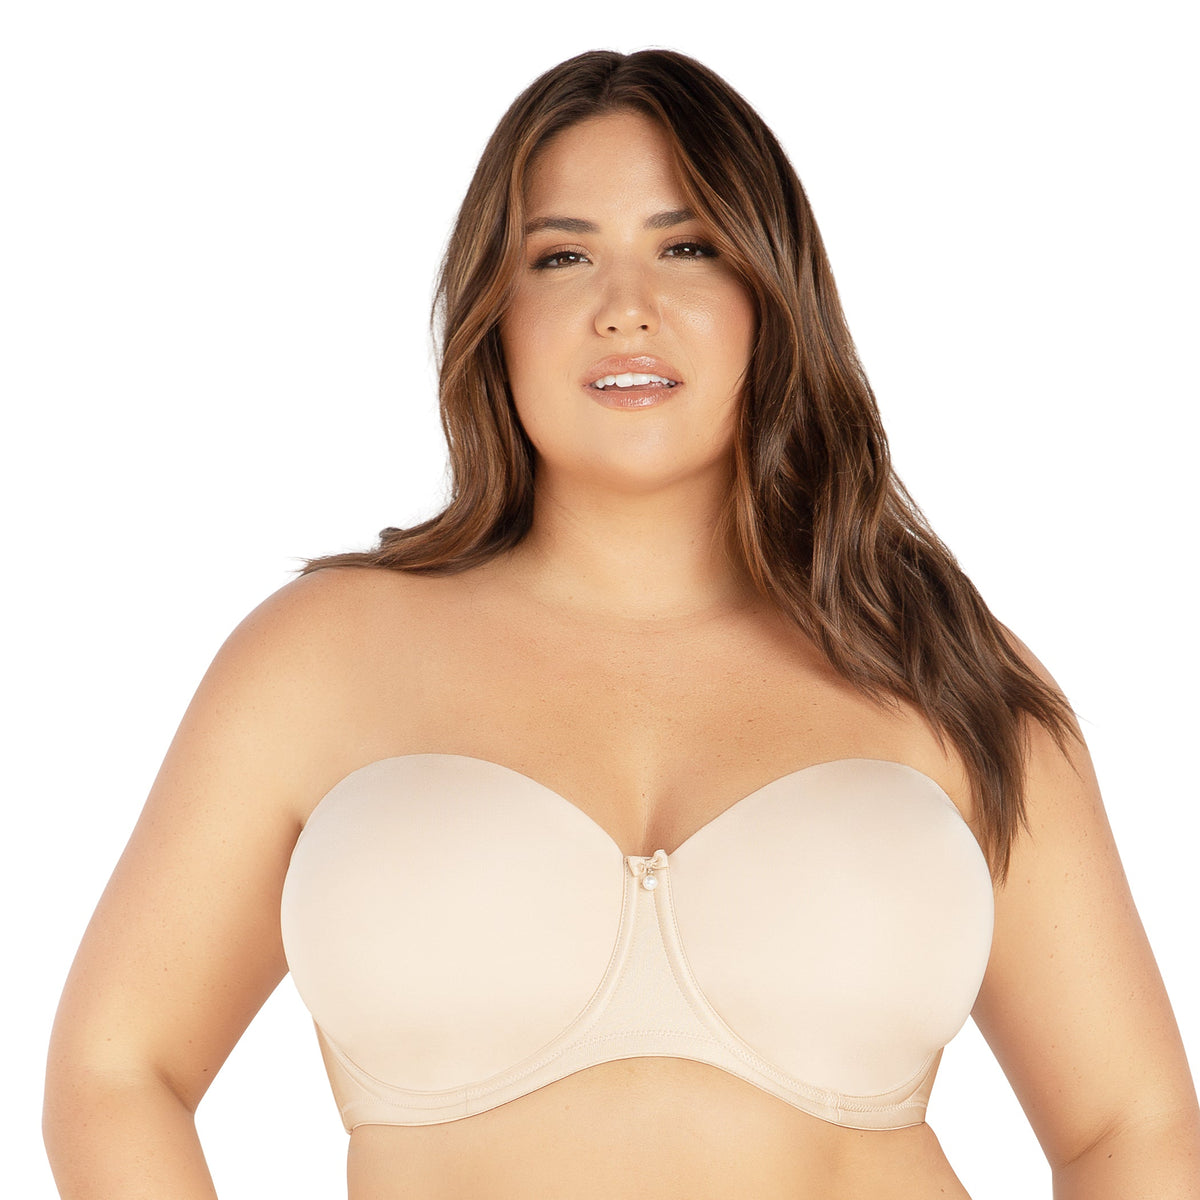 A Guide To The Different Bra Cup Styles - ParfaitLingerie.com - Blog